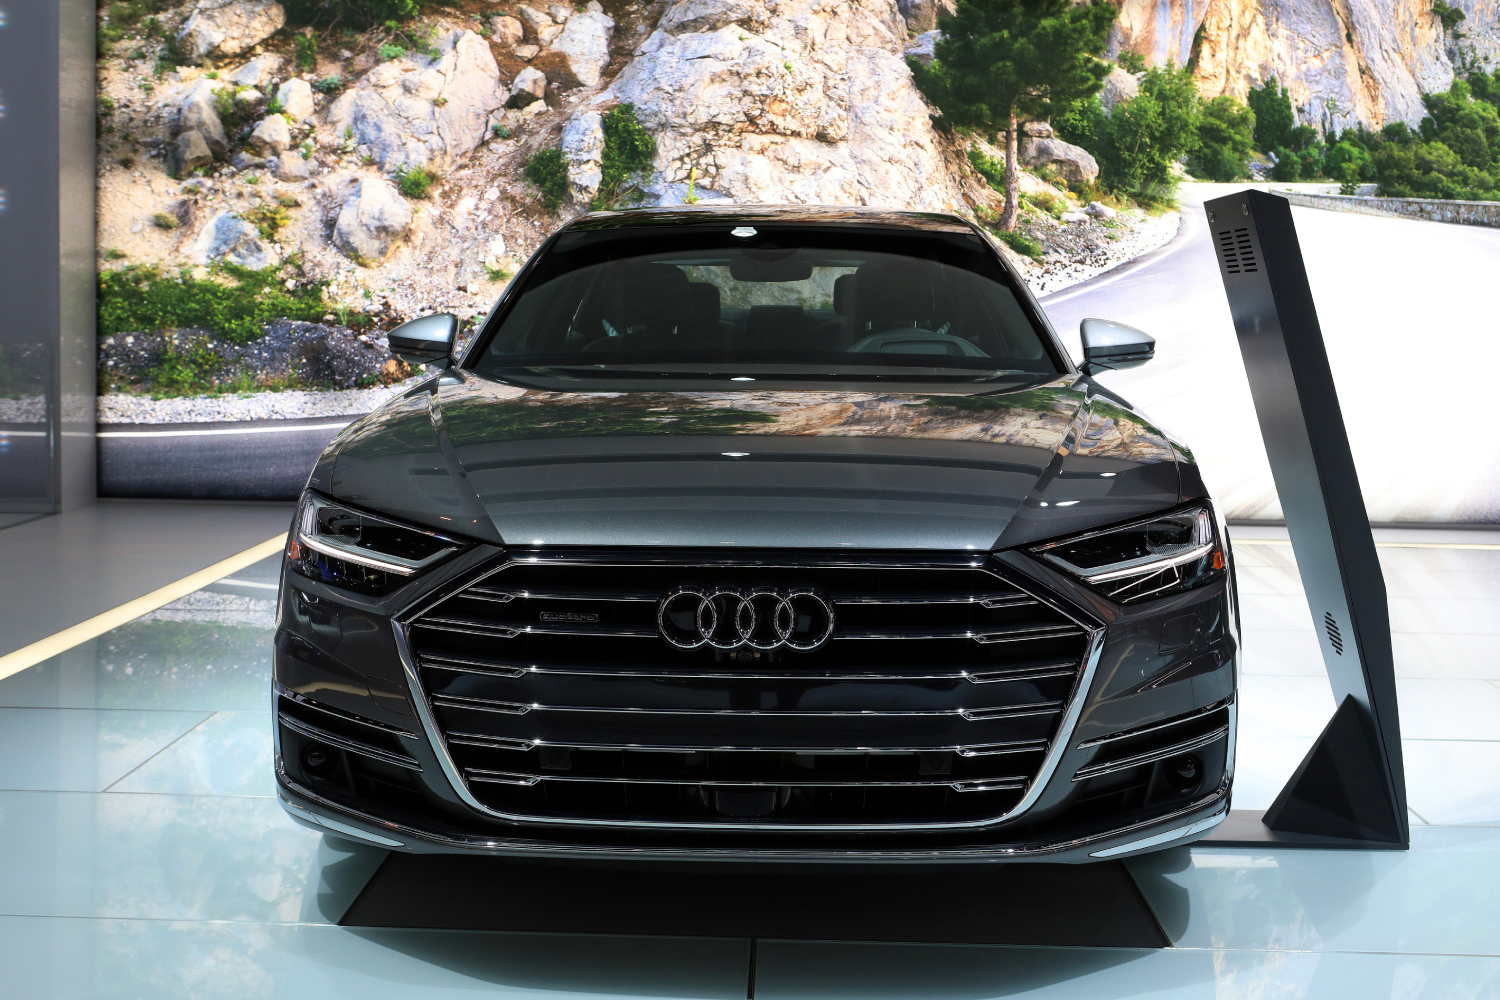 An Audi A8 on display at an auto show